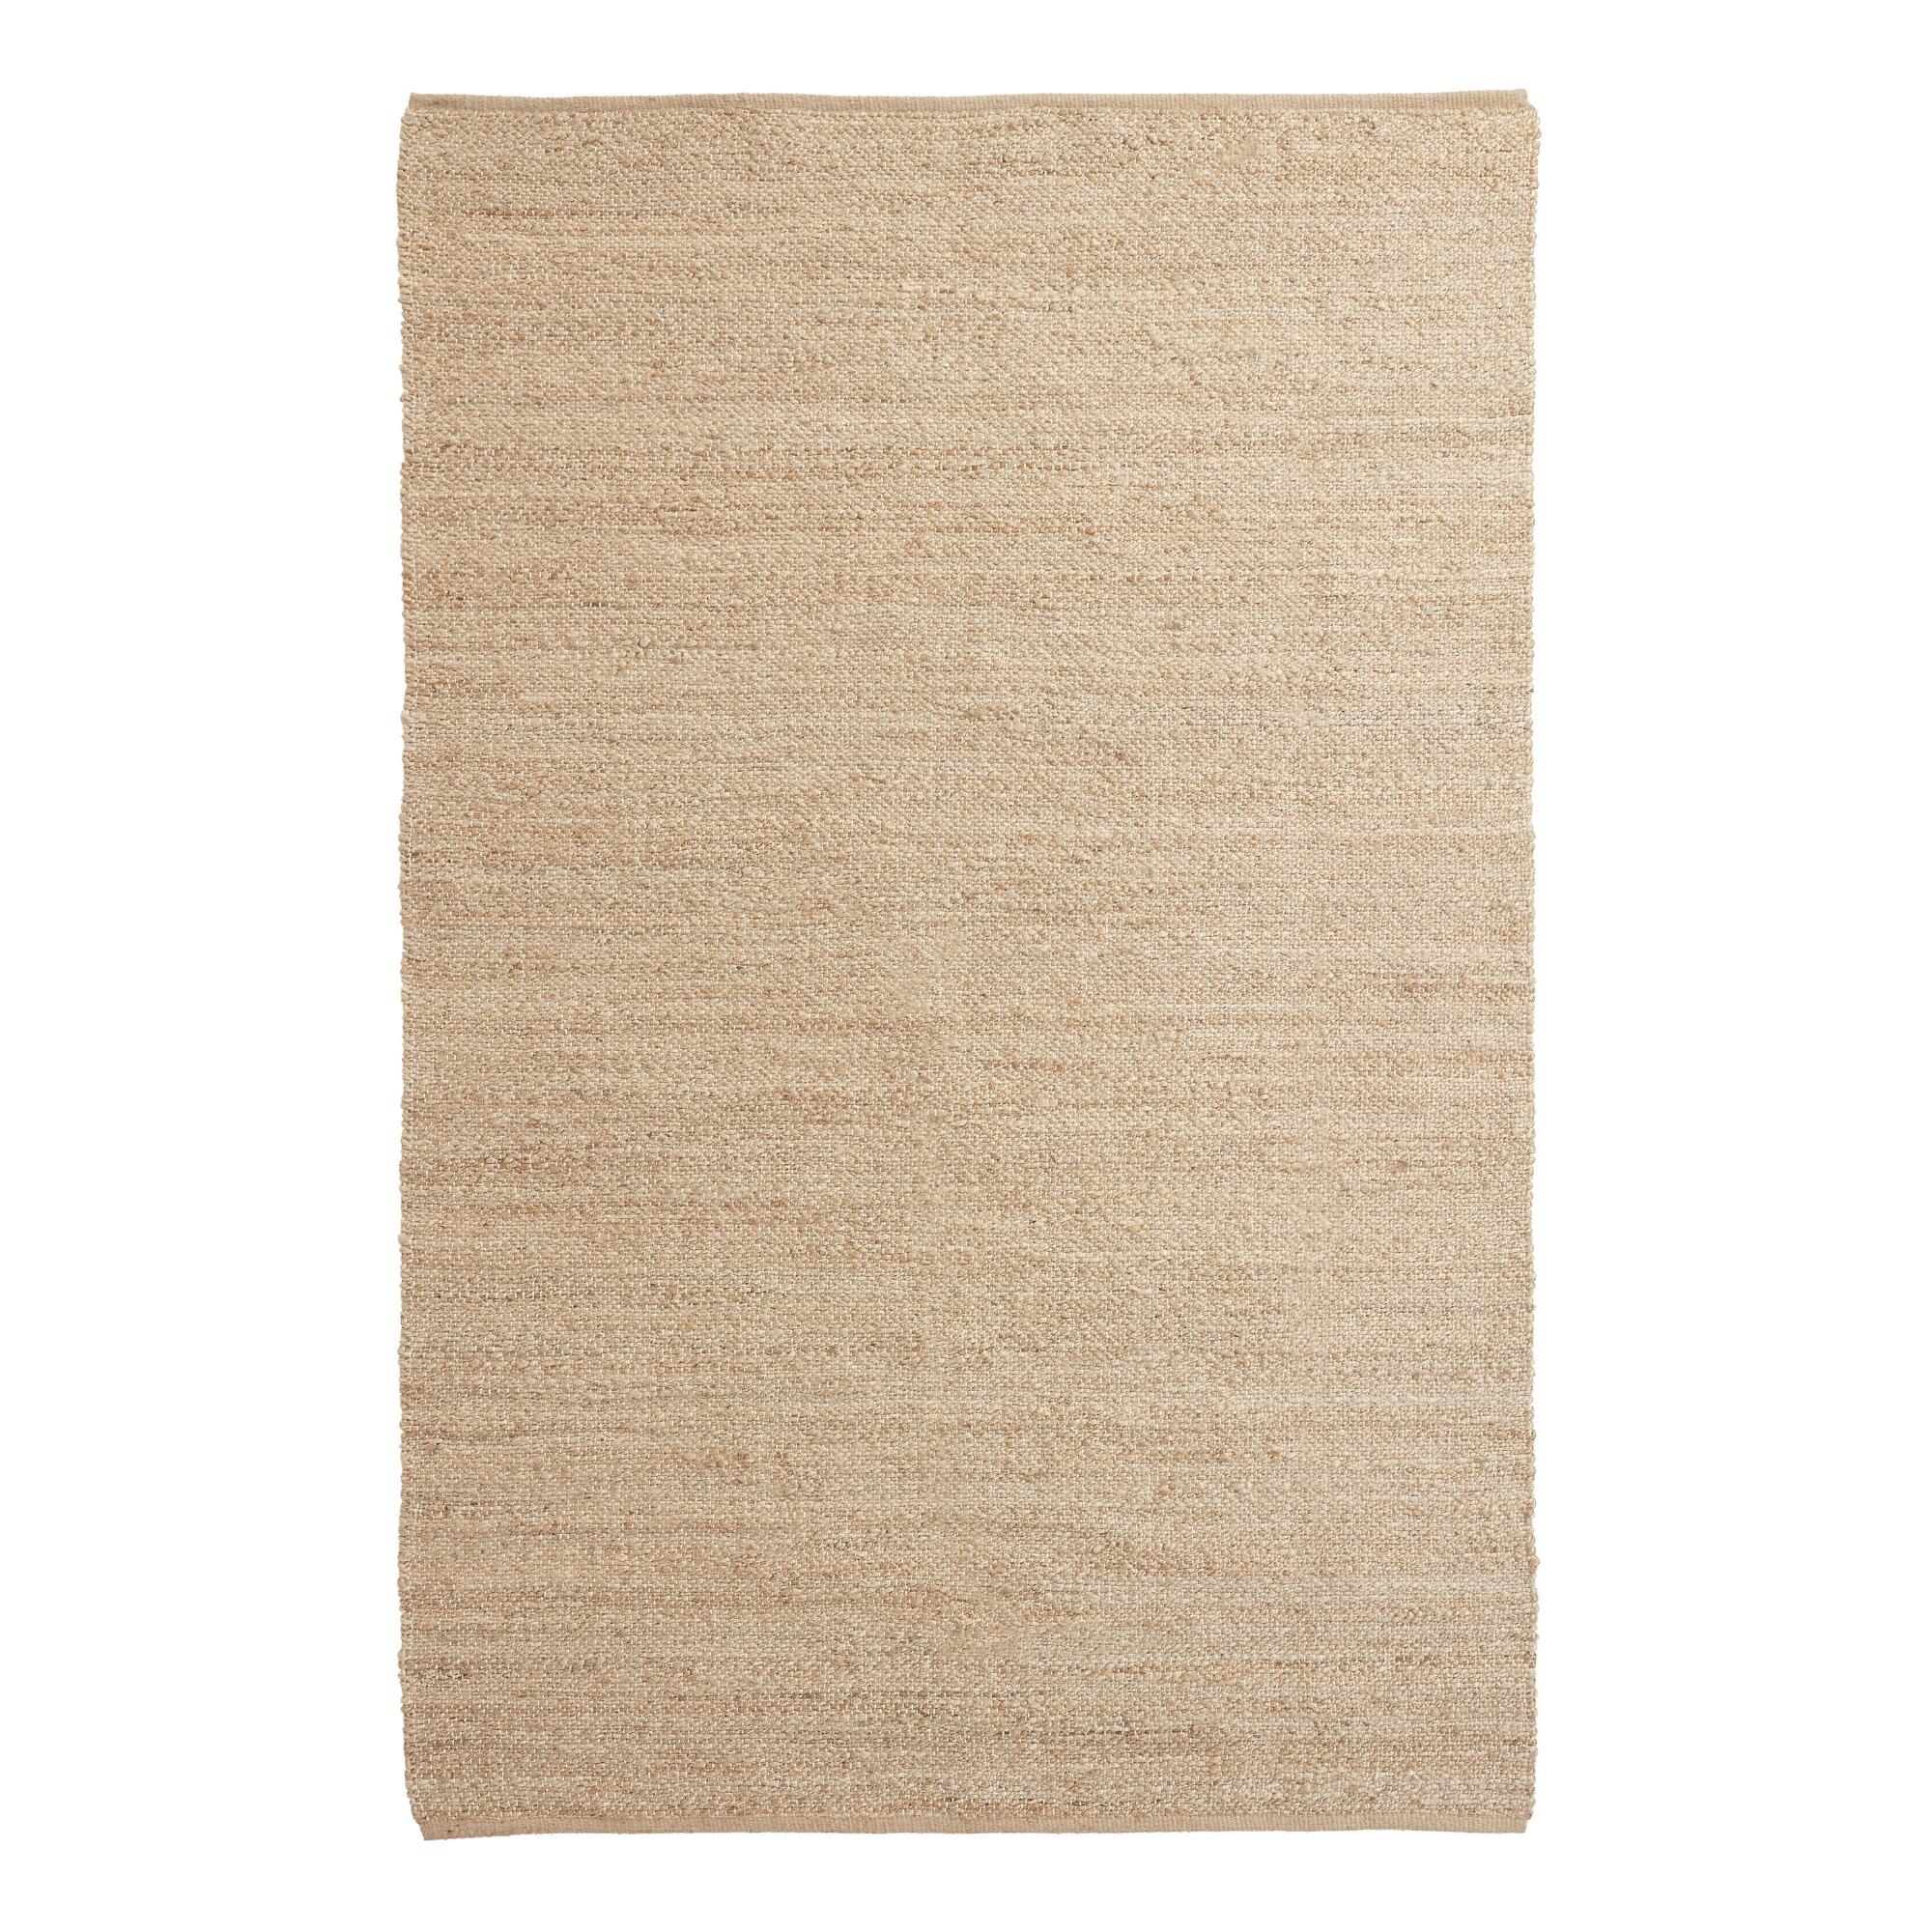 Natural Woven Jute and Cotton Reversible Area Rug - 5' x 8' by World Market